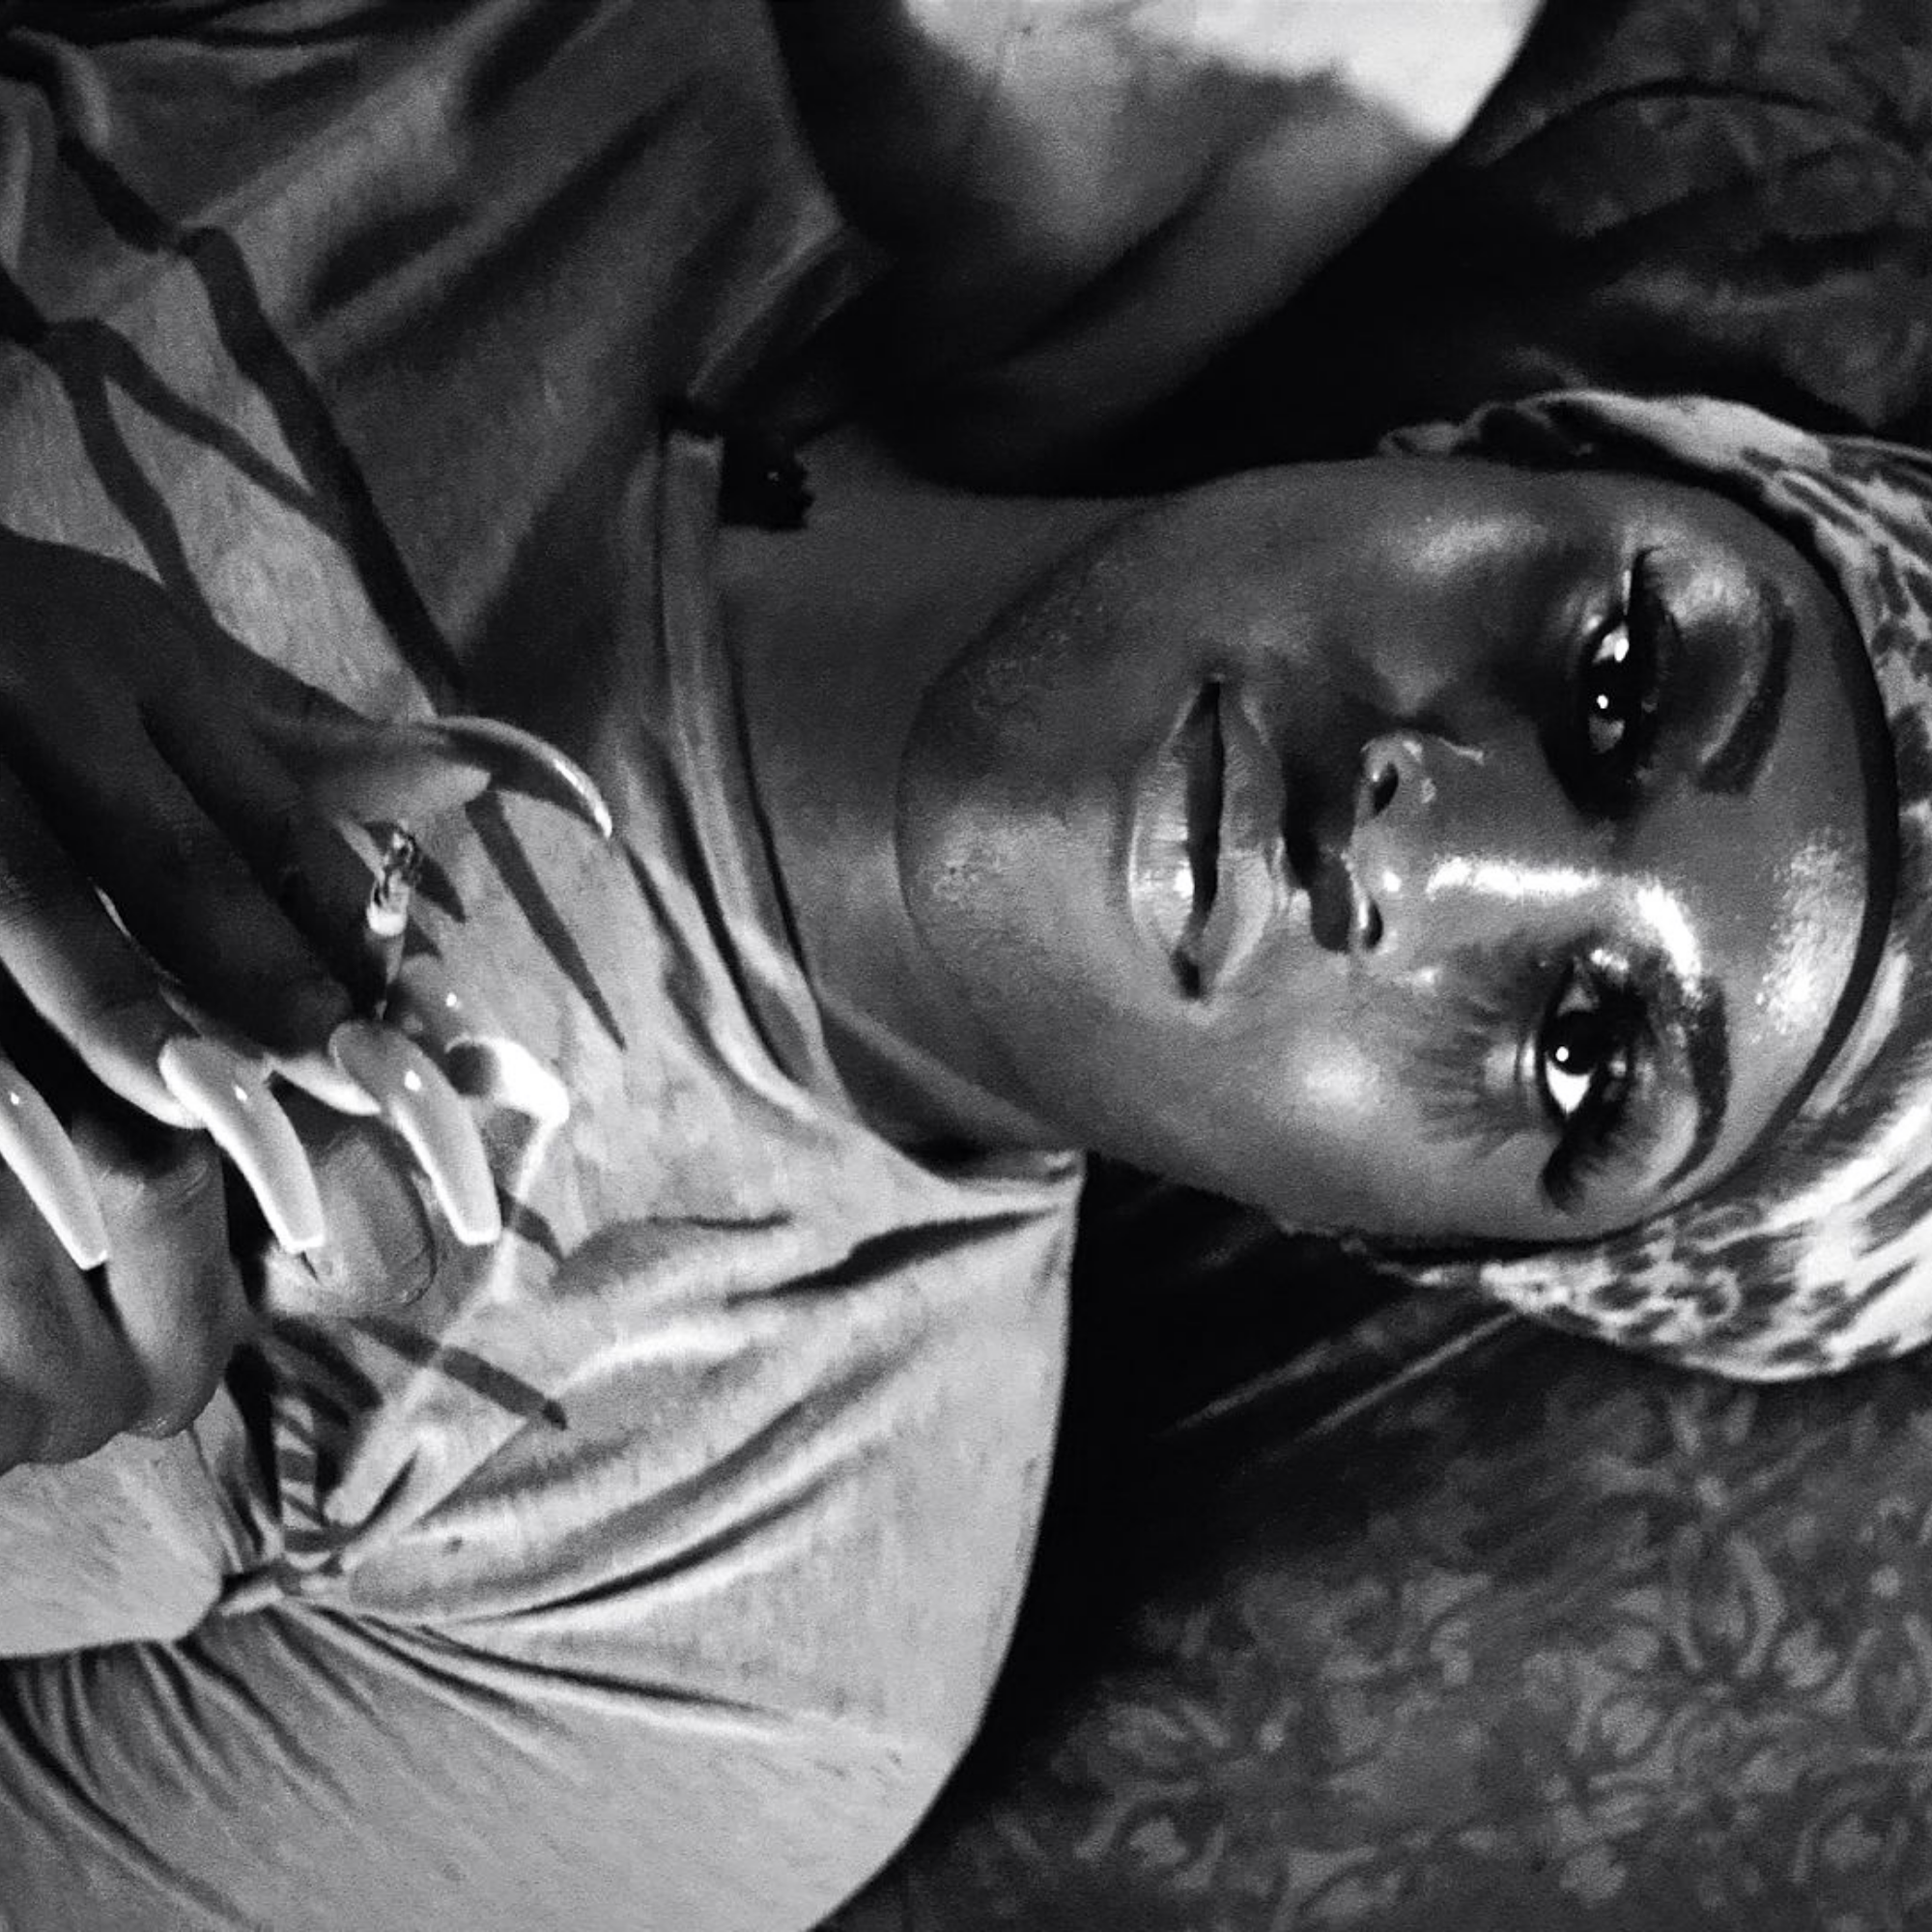 A woman lies on her back staring up into the camera, in black and white.